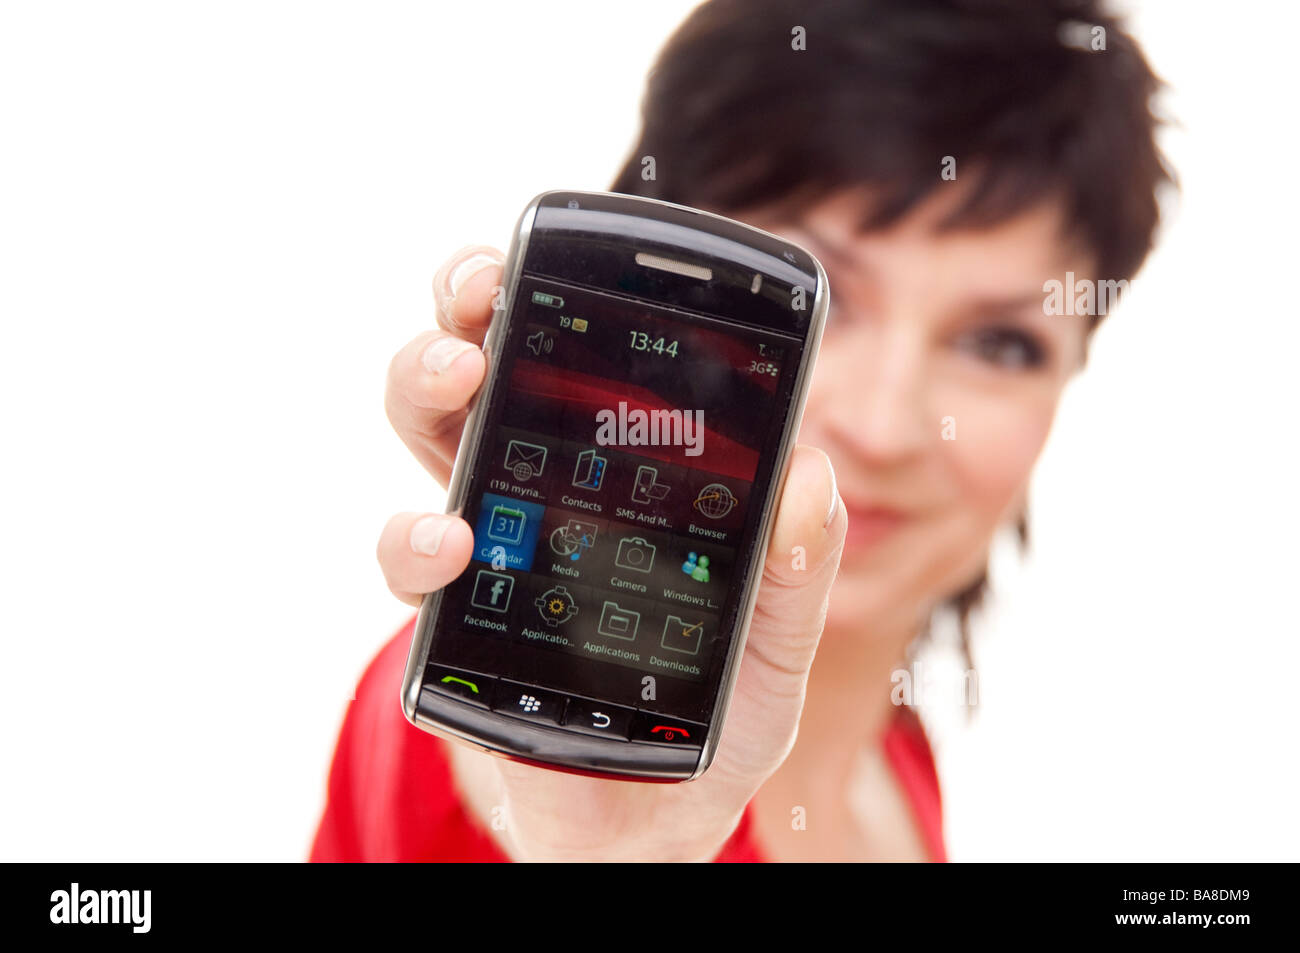 woman holding up her blackberry mobile telephone Stock Photo